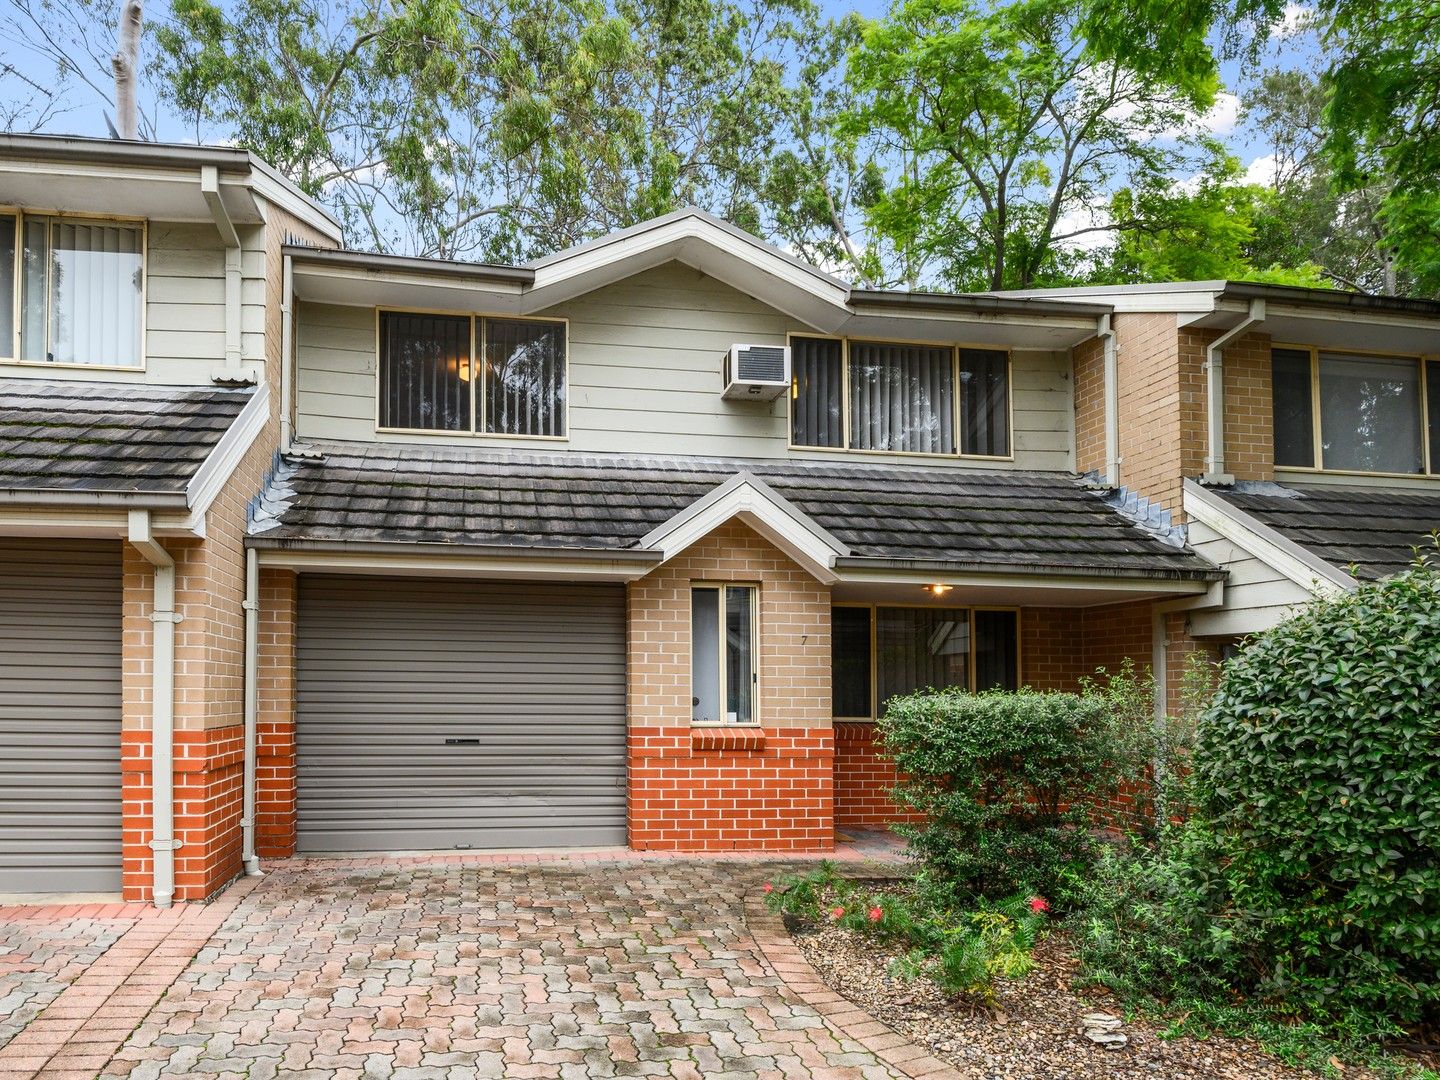 7/155-157 Derby Street, Penrith NSW 2750, Image 0